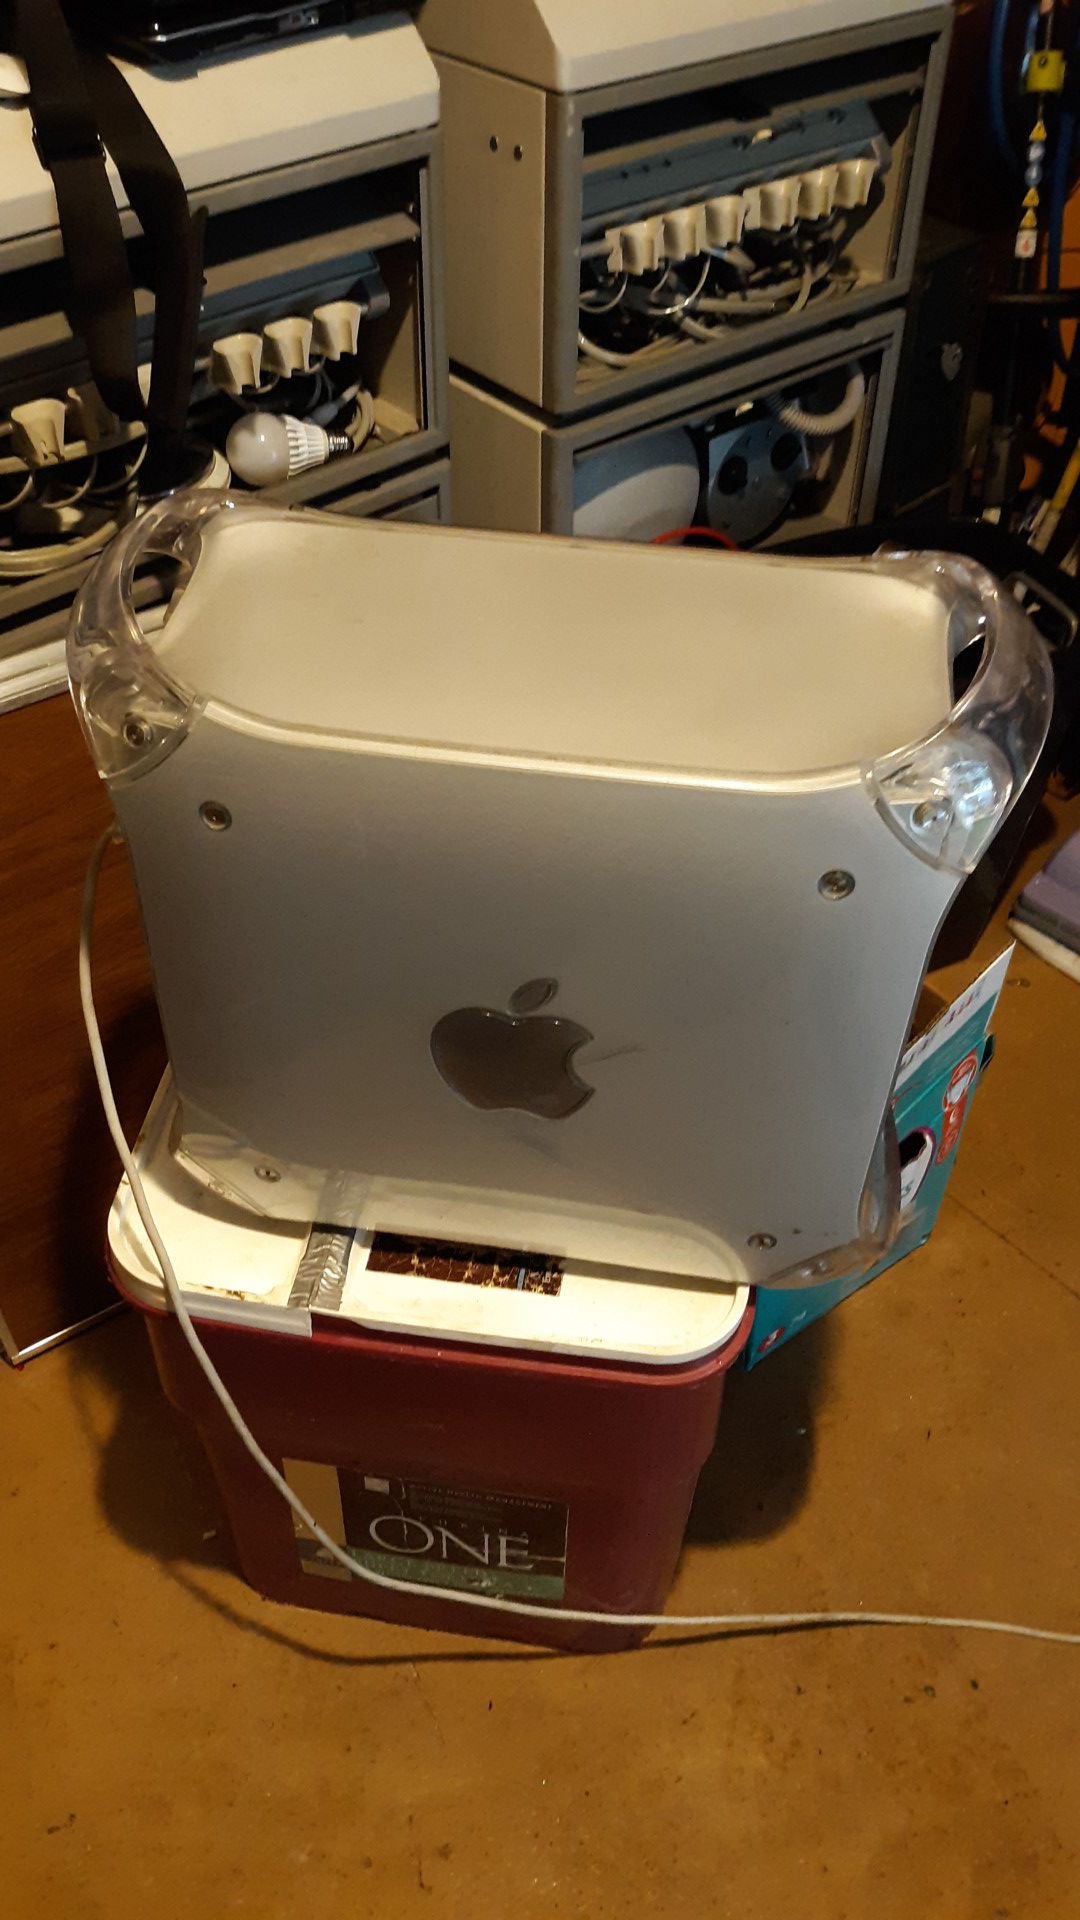 Power mac G4 quicksilver will be taking it for scrap in the morning